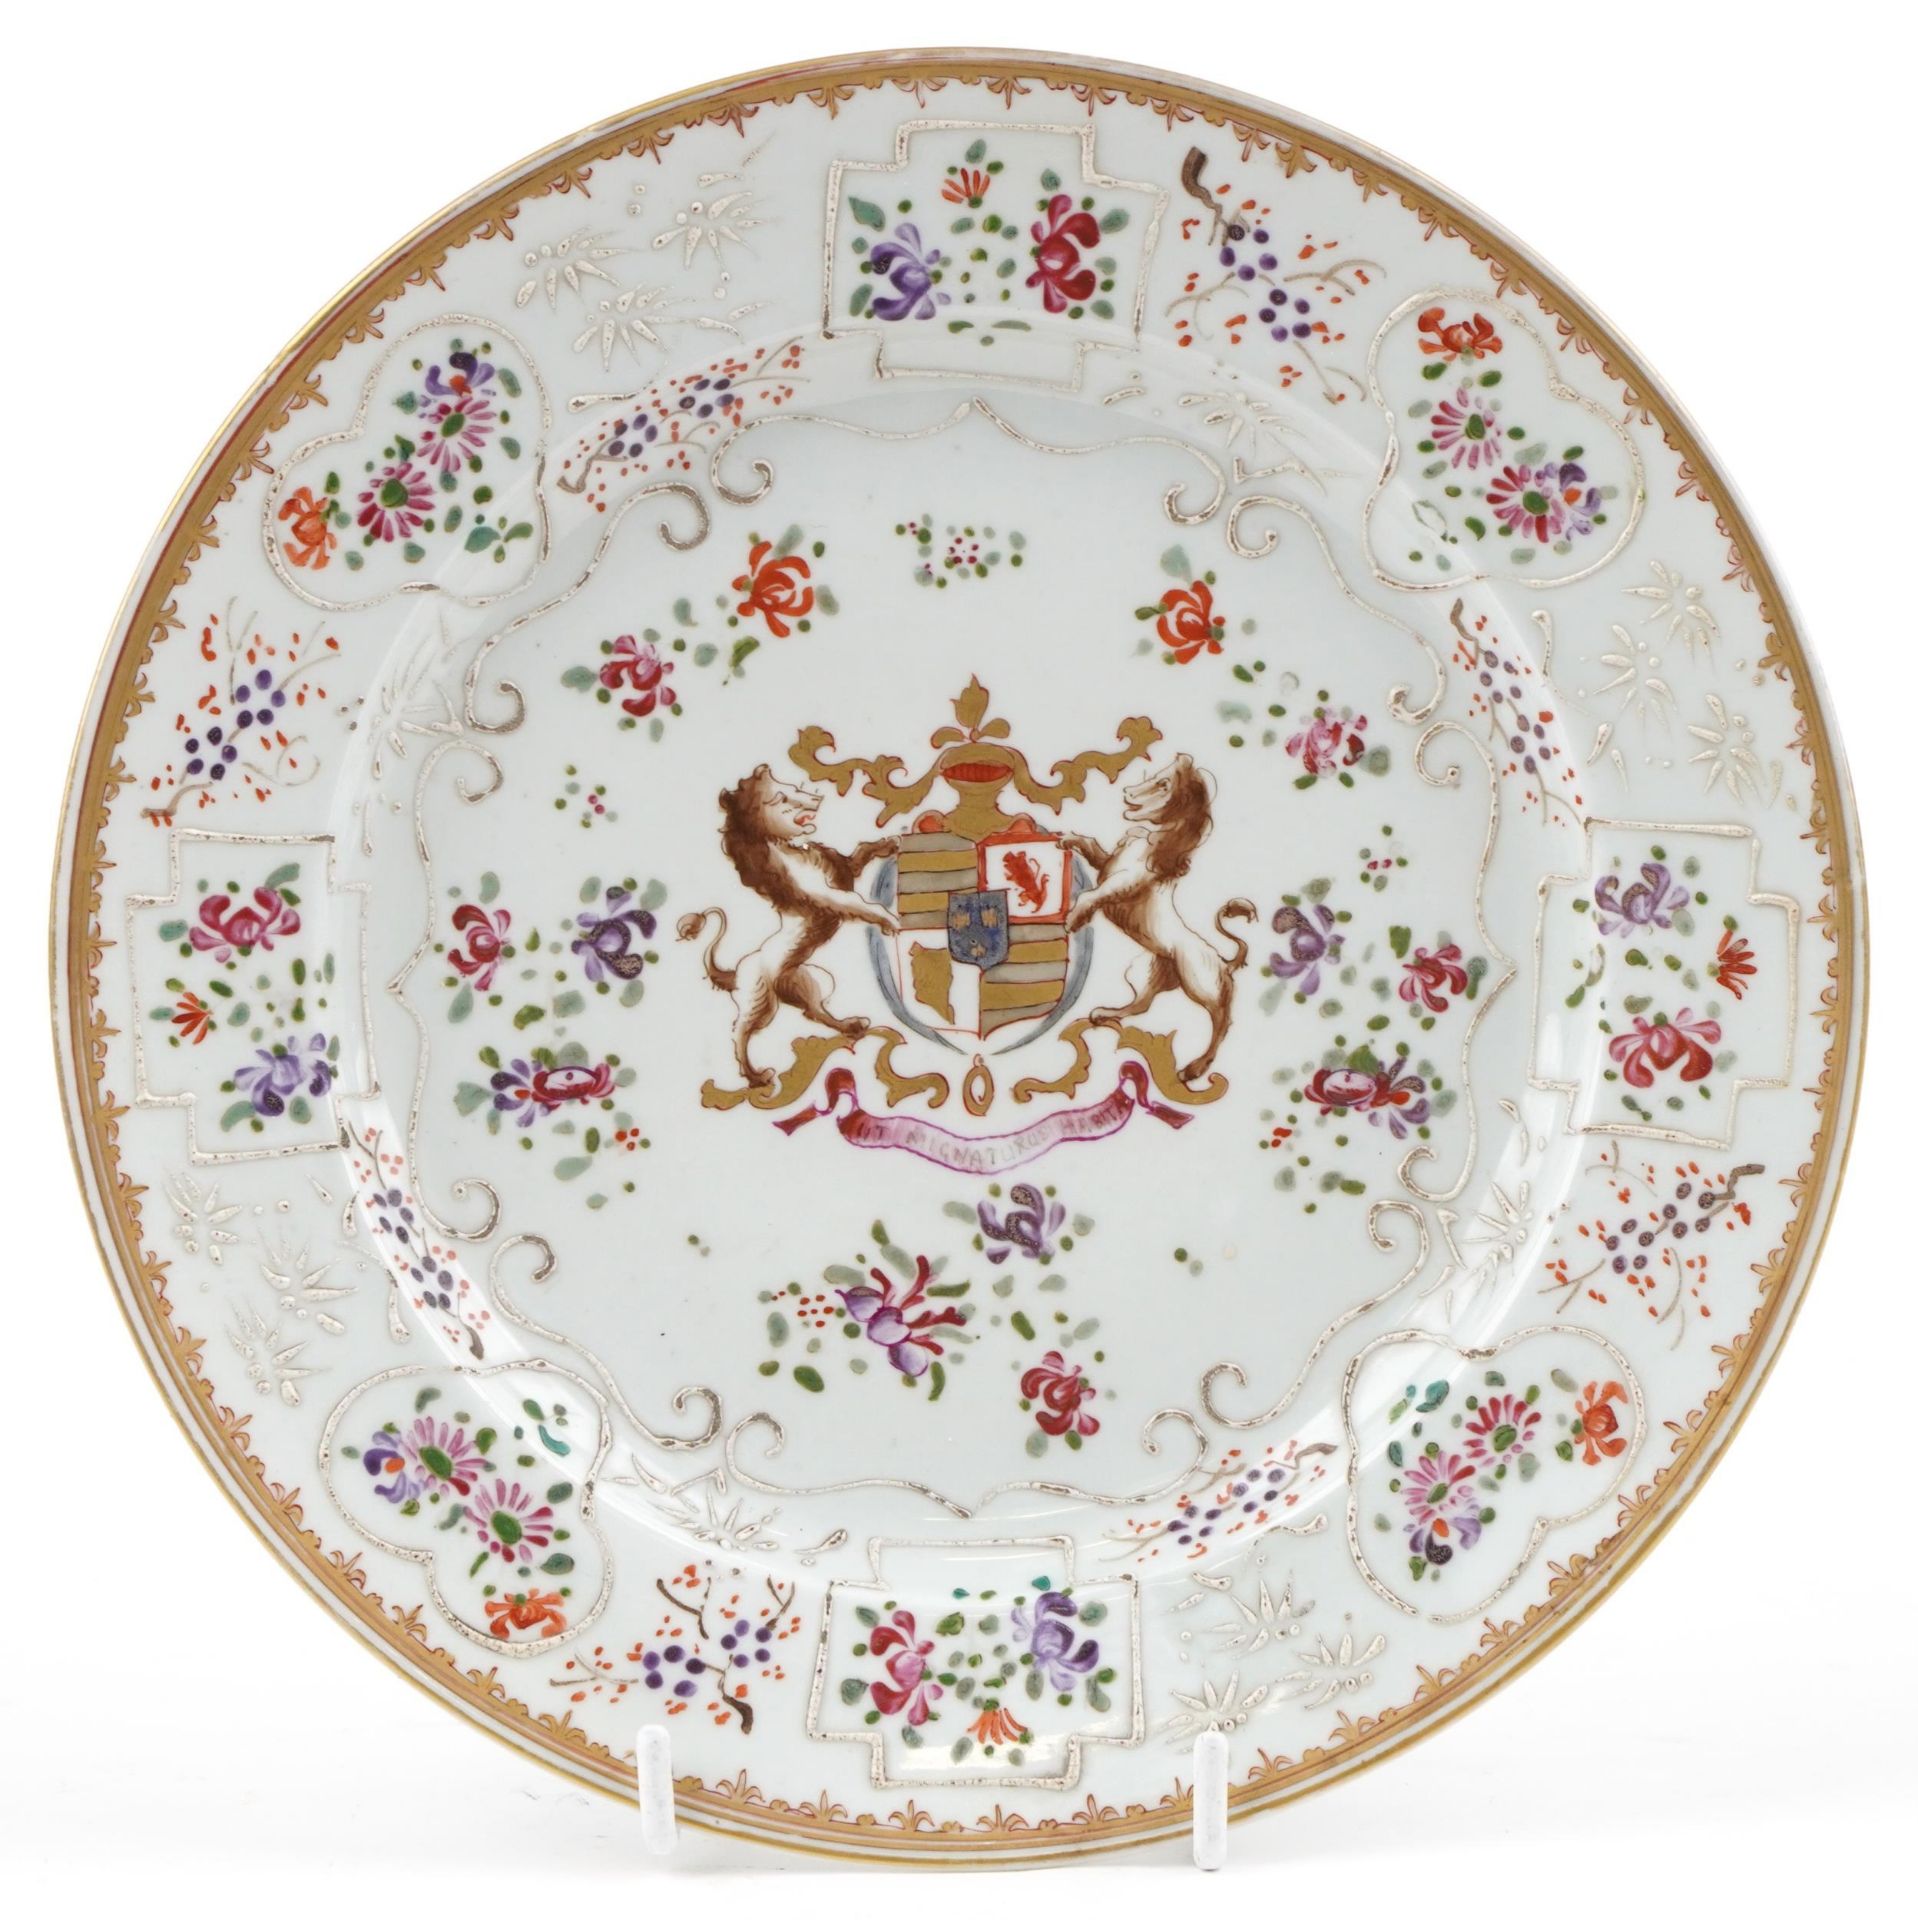 19th century Sansom porcelain armorial plate hand painted with a coat of arms and flowers, 23cm in